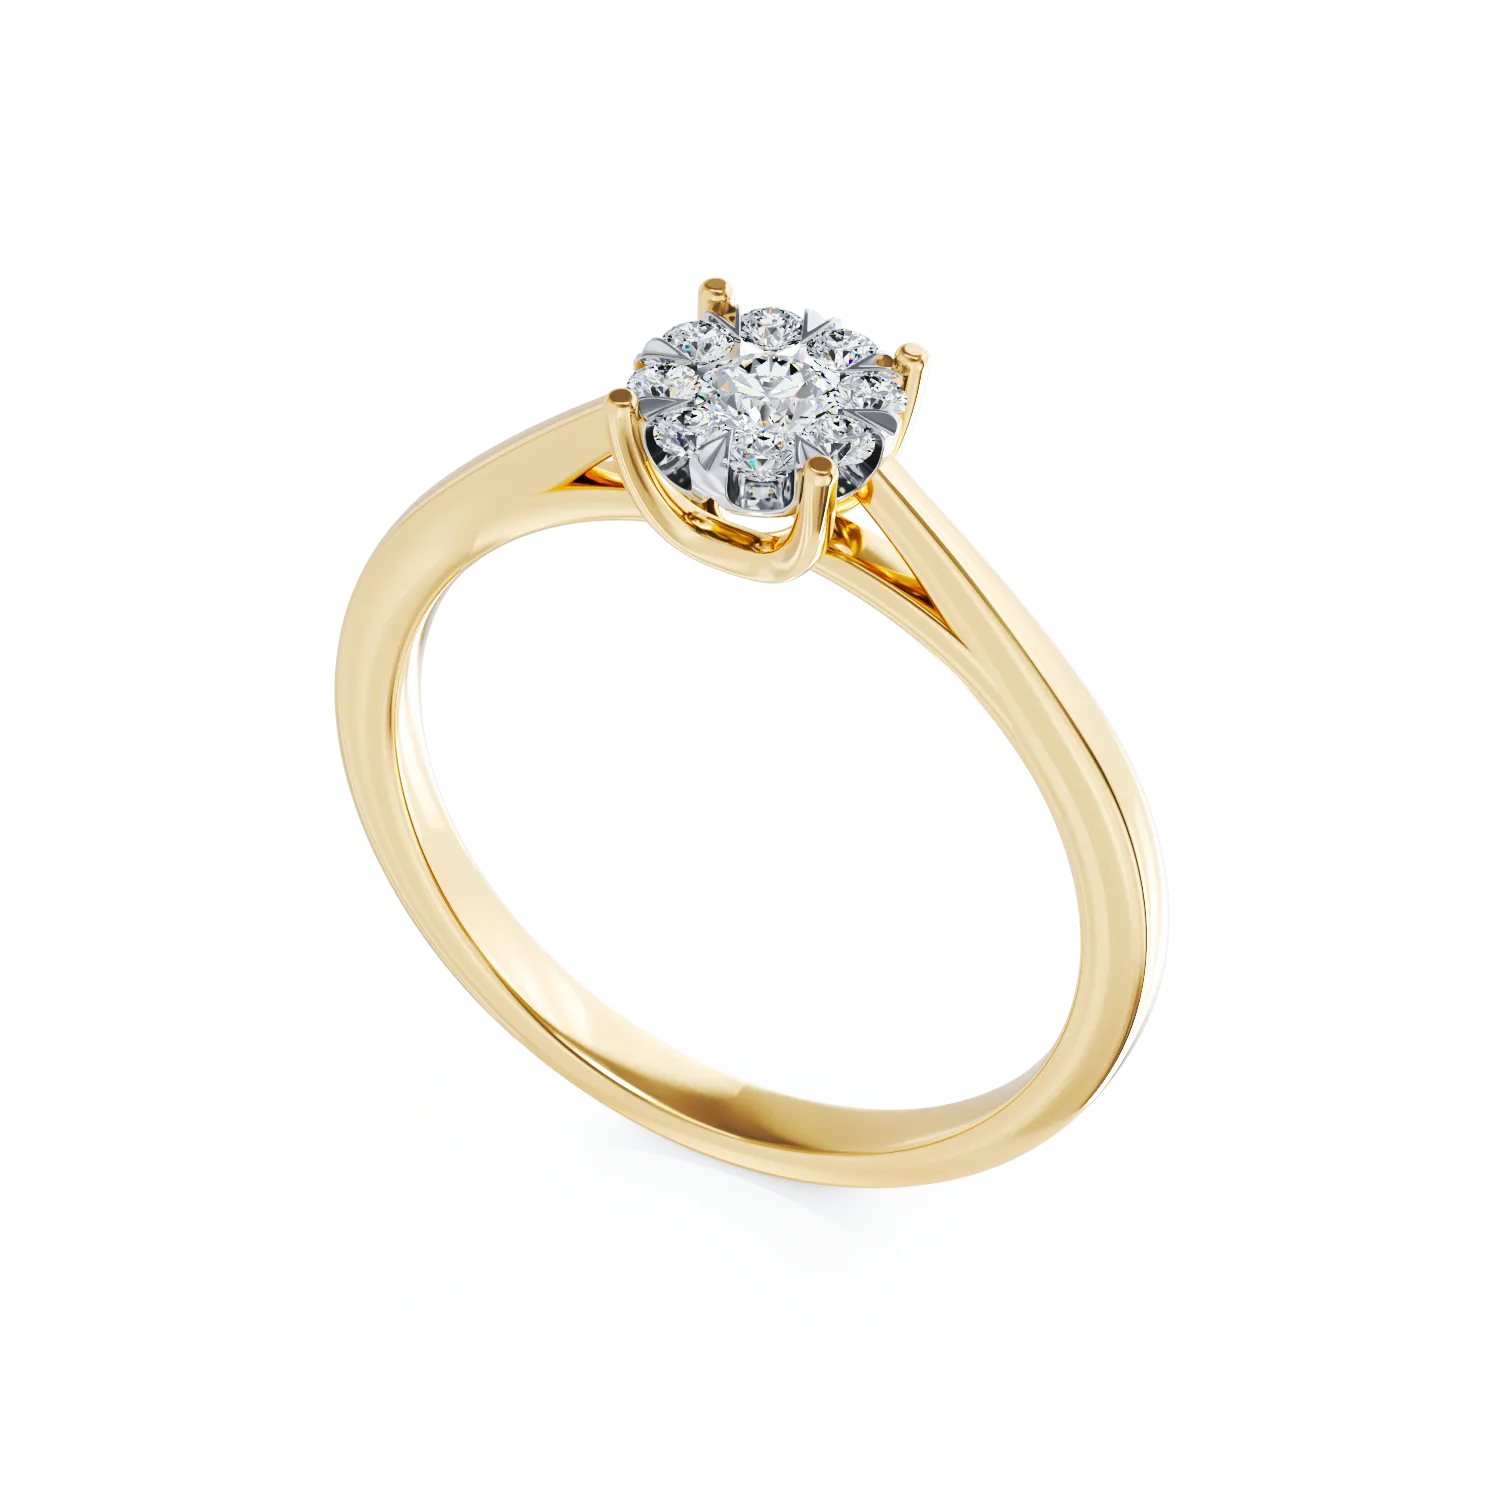 18K yellow gold engagement ring with 0.255ct diamonds